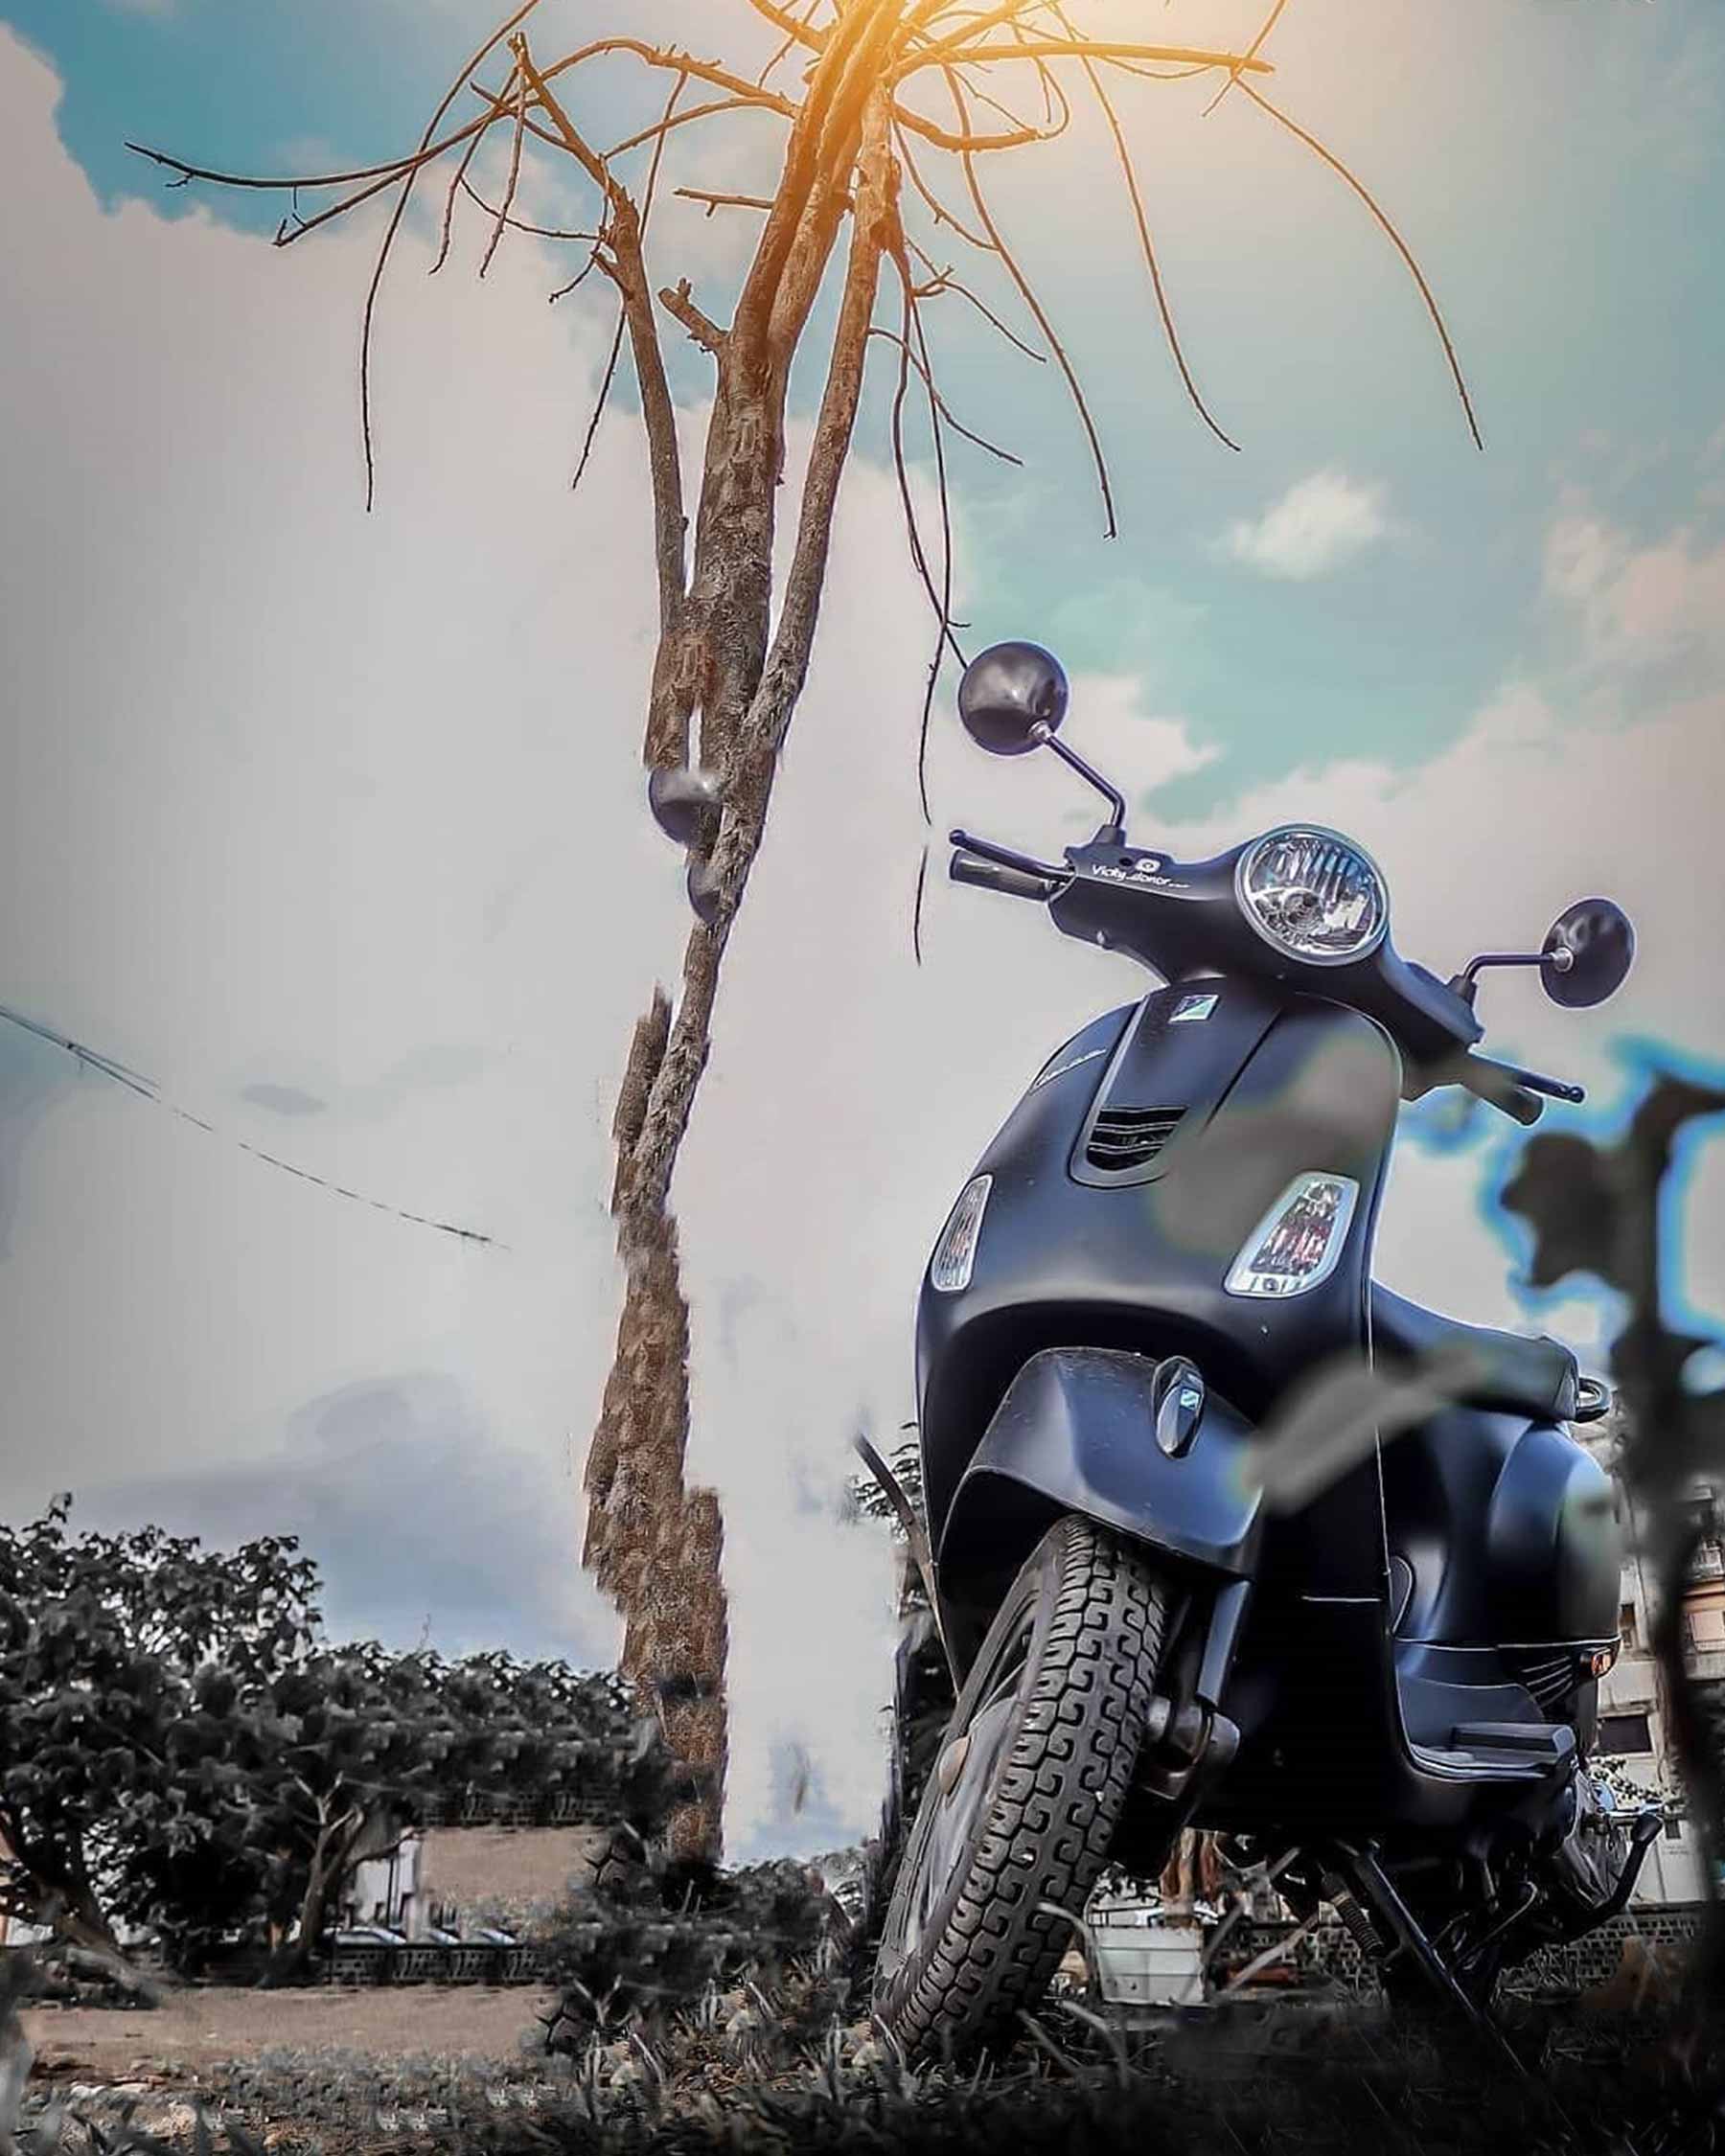 Full HD Scooty PicsArt Background Free Stock Image